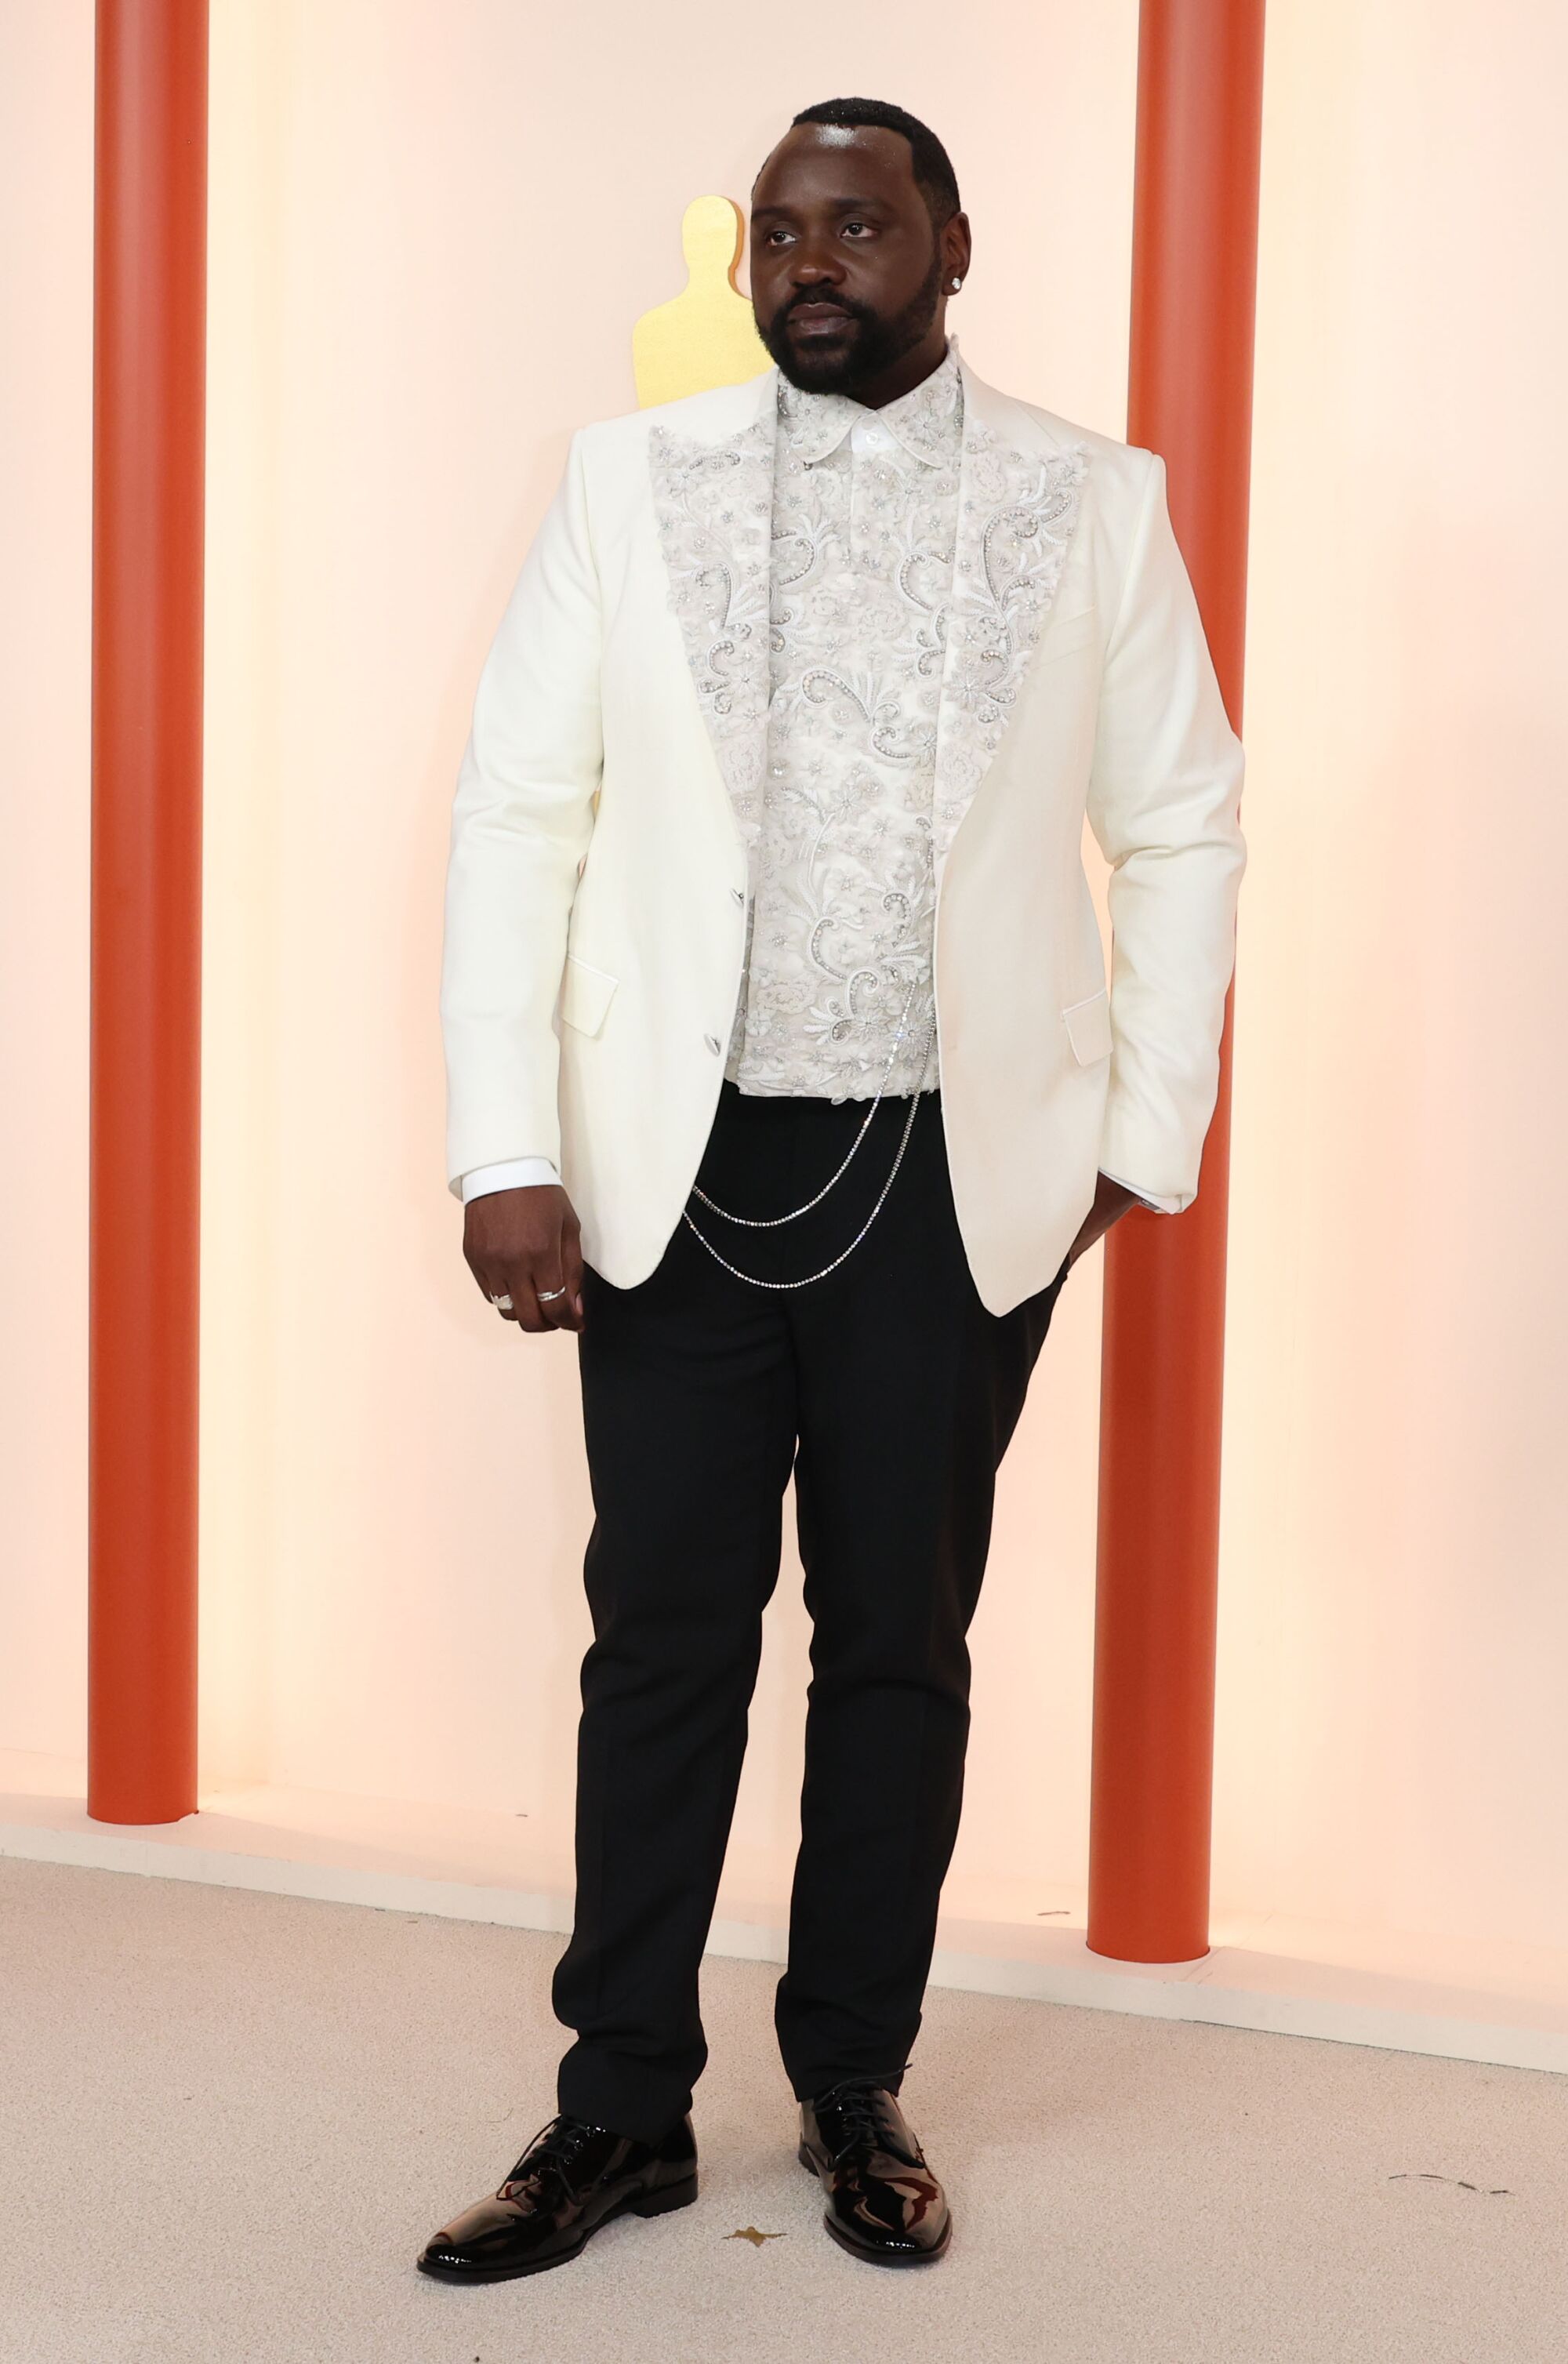 Brian Tyree Henry at the 95th Academy Awards.